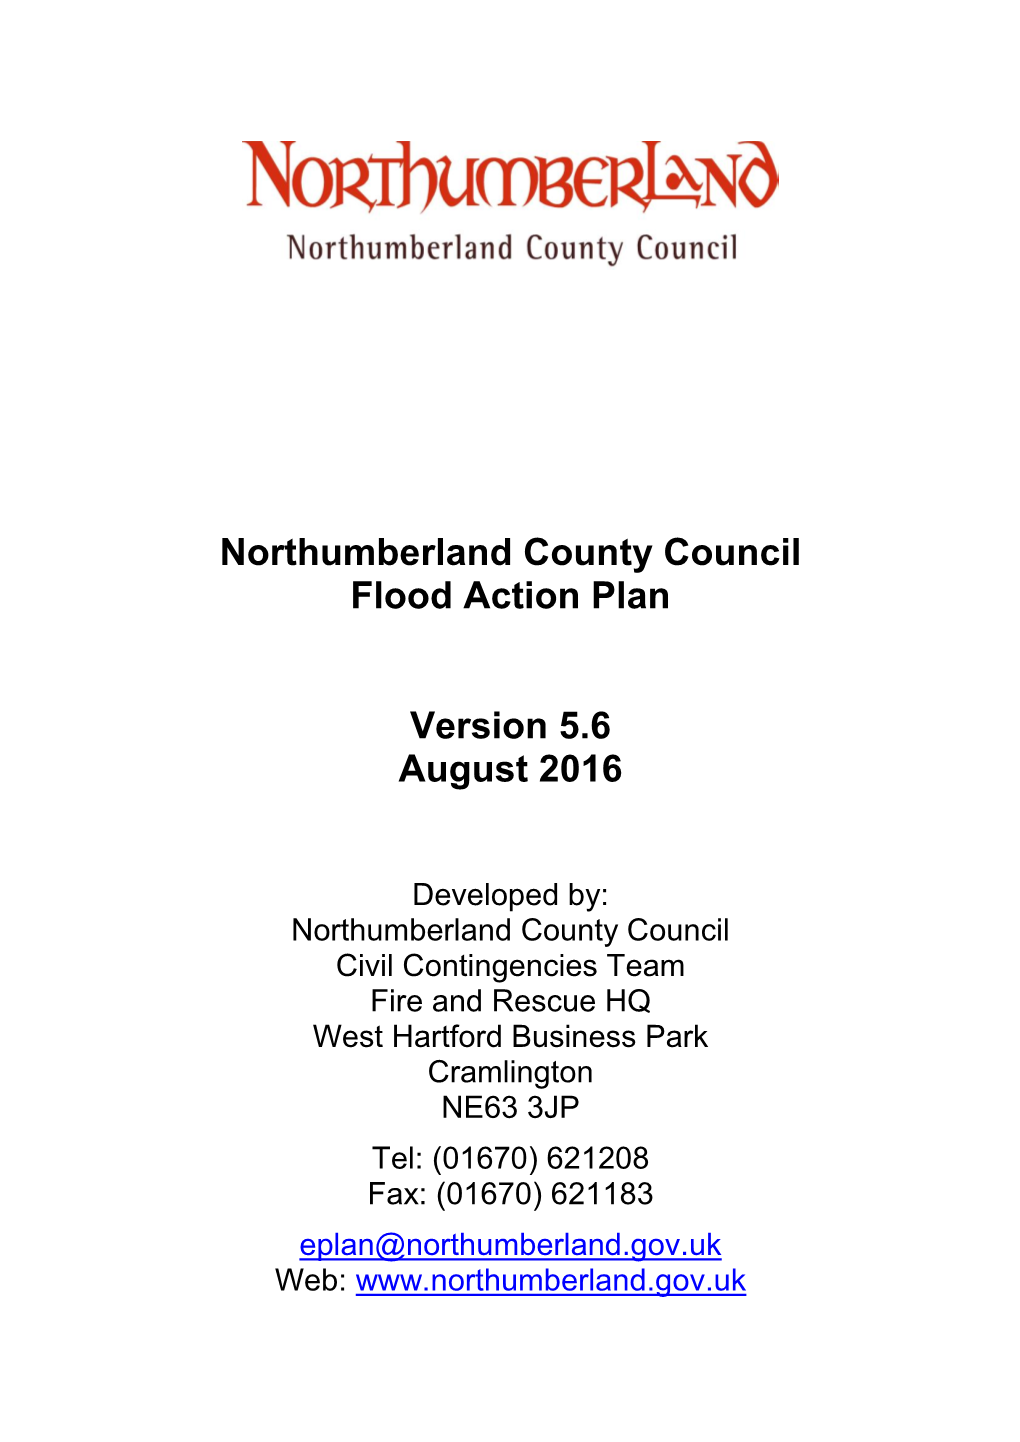 Northumberland County Council Flood Action Plan Version 5.6 August 2016